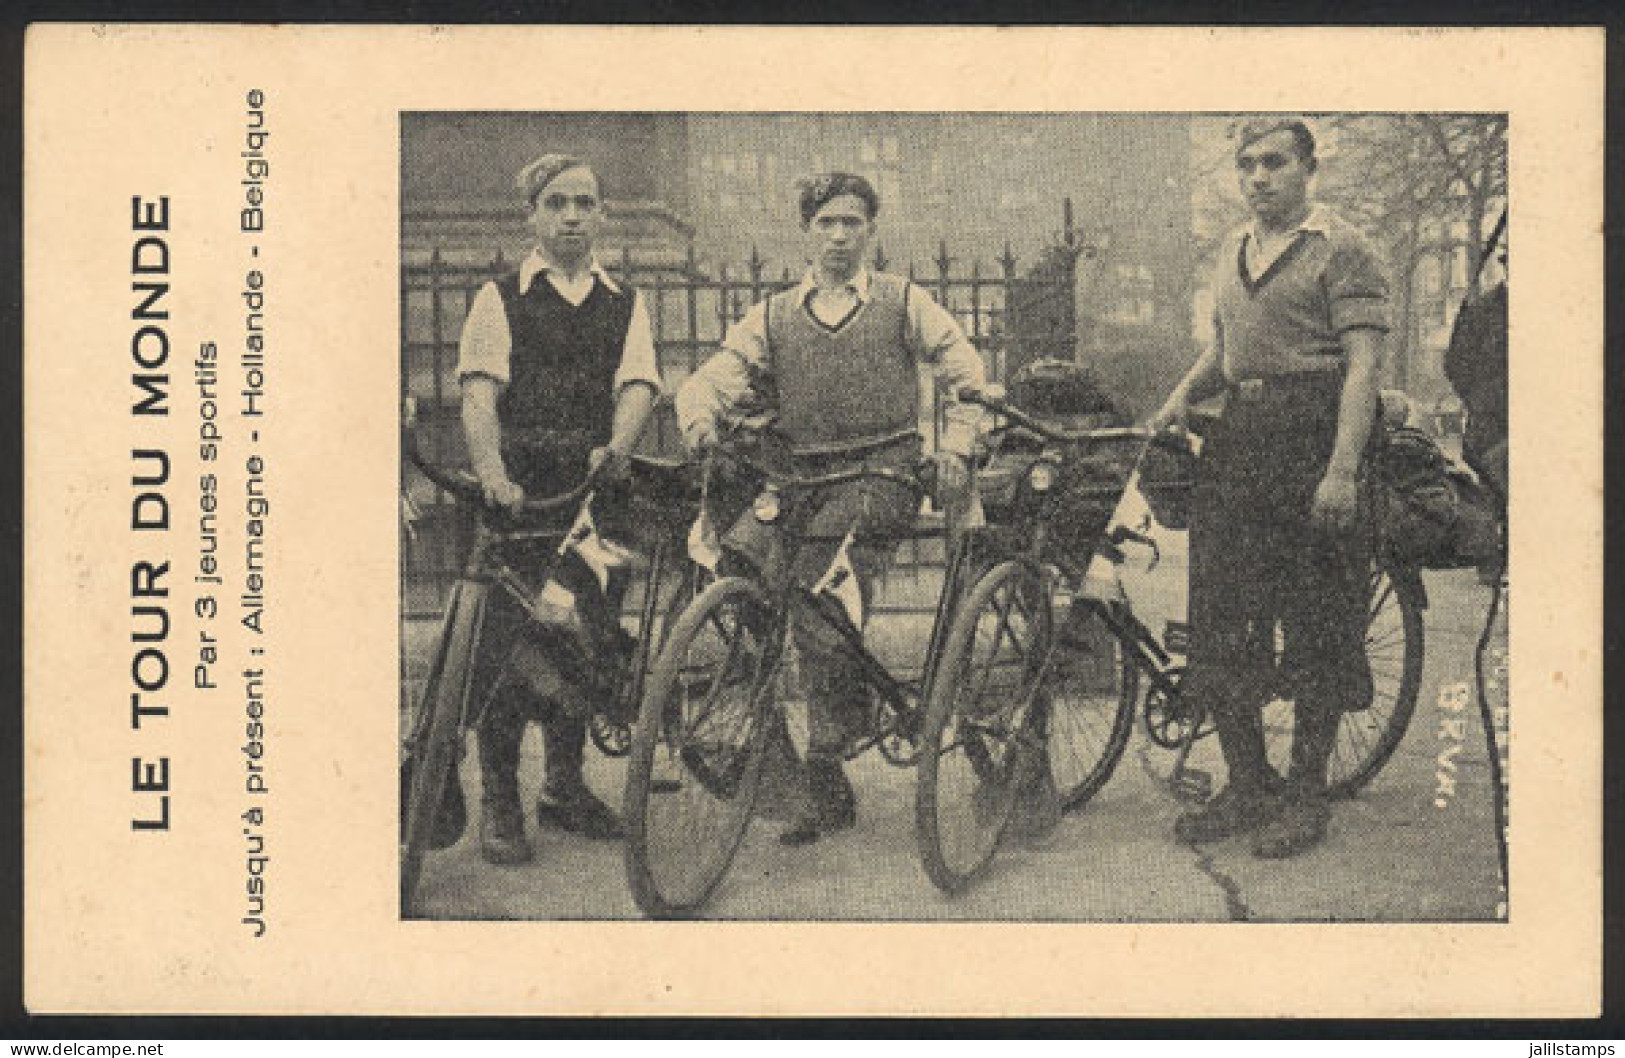 TOPIC SPORTS: CYCLING Around The World, Old Unused Card With Photo Of The 3 Men From Germany, Netherlands And Belgium, V - Radsport